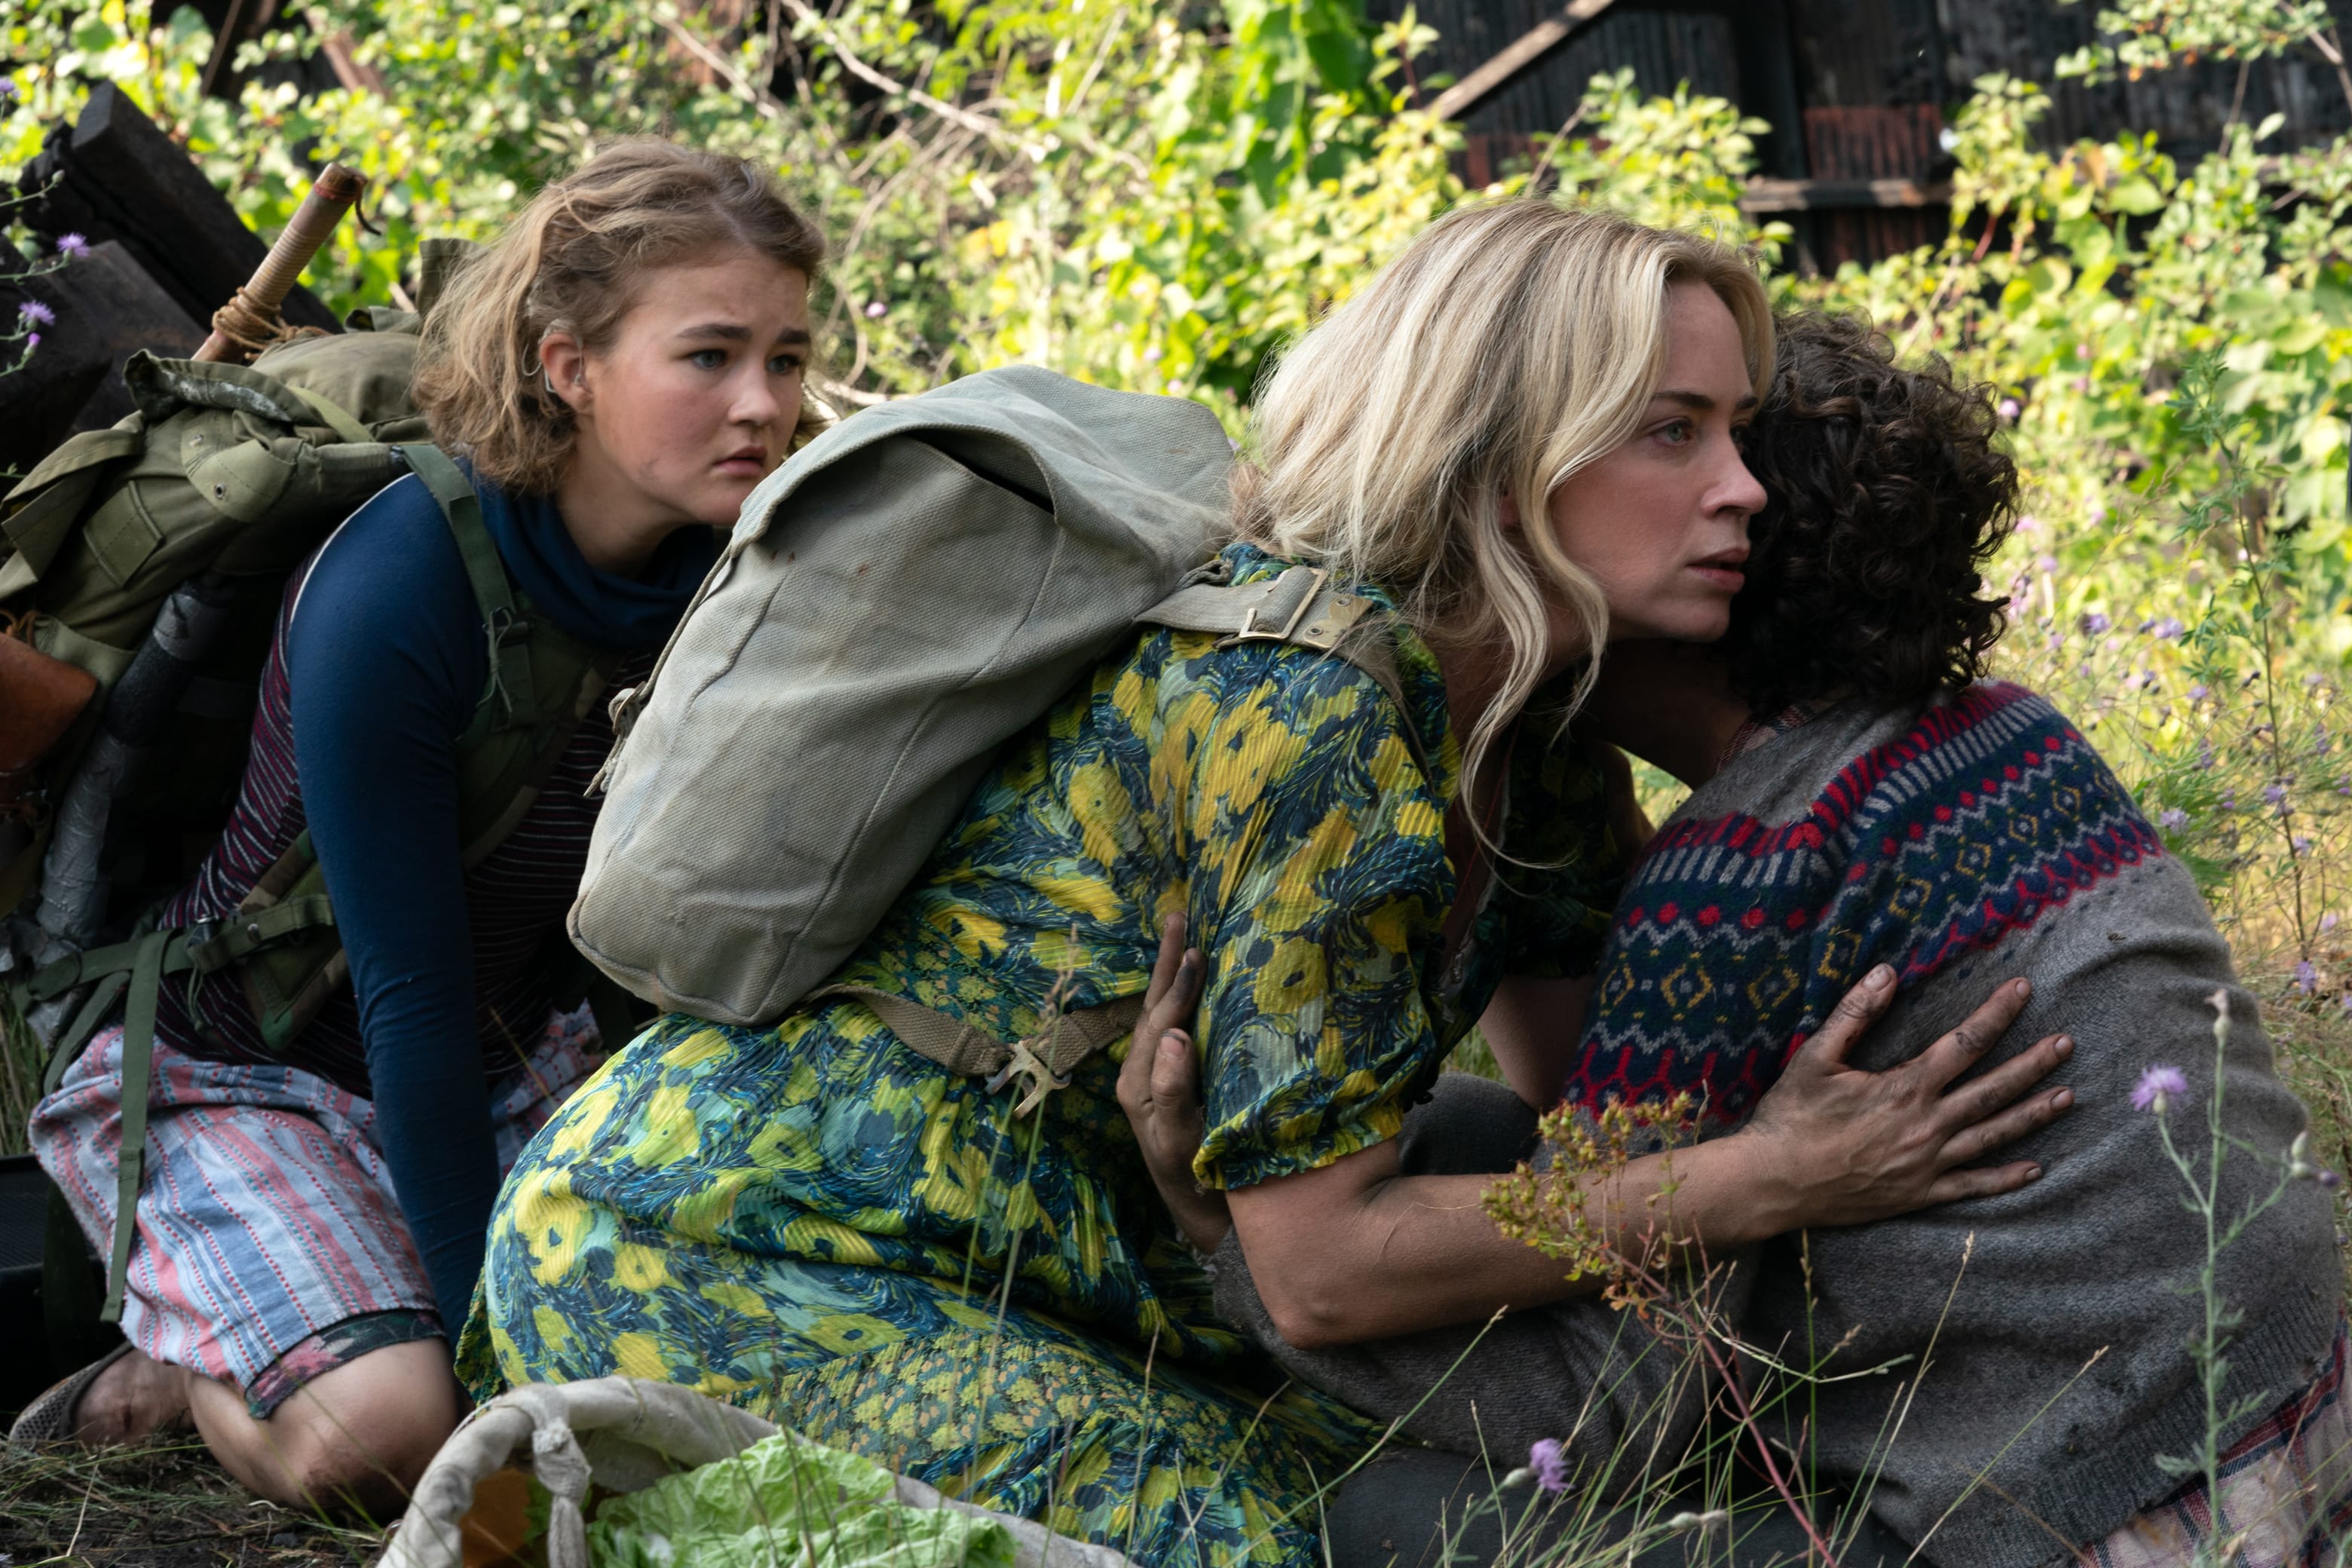 A Quiet Place Part II Review: Slick Monster Sequel Delivers High-Tension Thrills